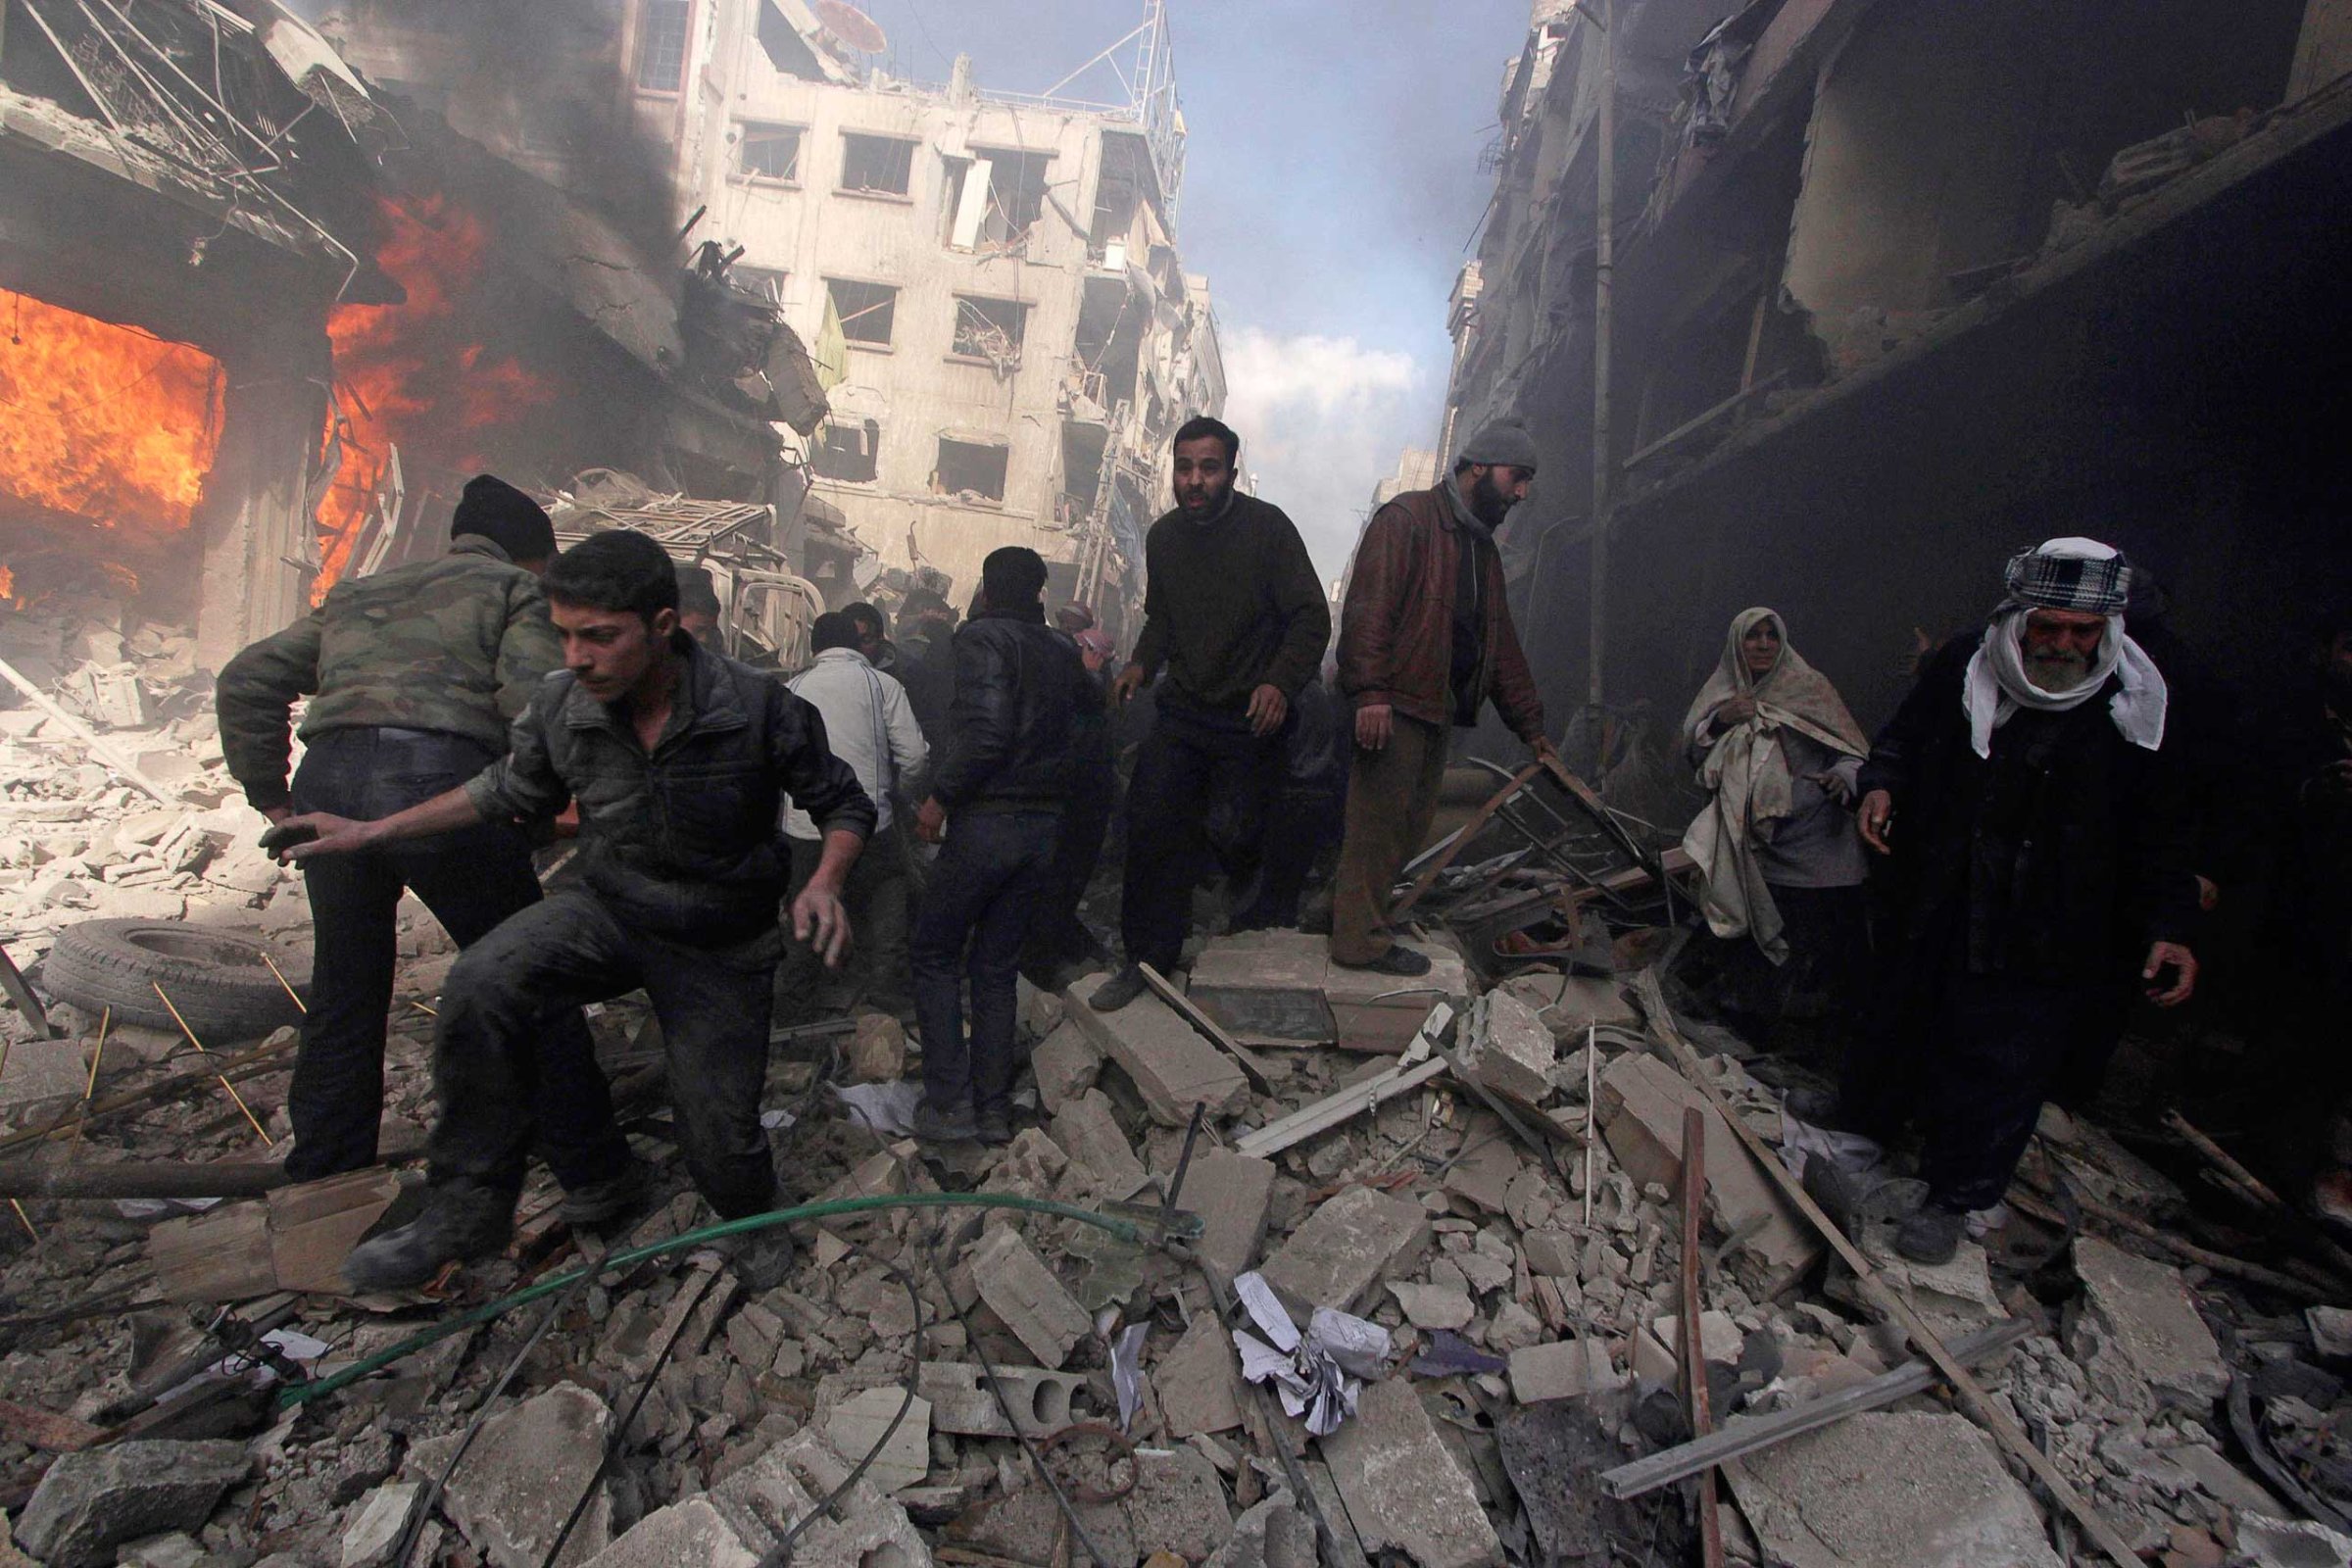 People walk on rubble as others try to put out a fire after what activists said were airstrikes followed by shelling by forces loyal to Syria's President Bashar Assad in the Douma neighborhood of Damascus, Feb. 9, 2015.